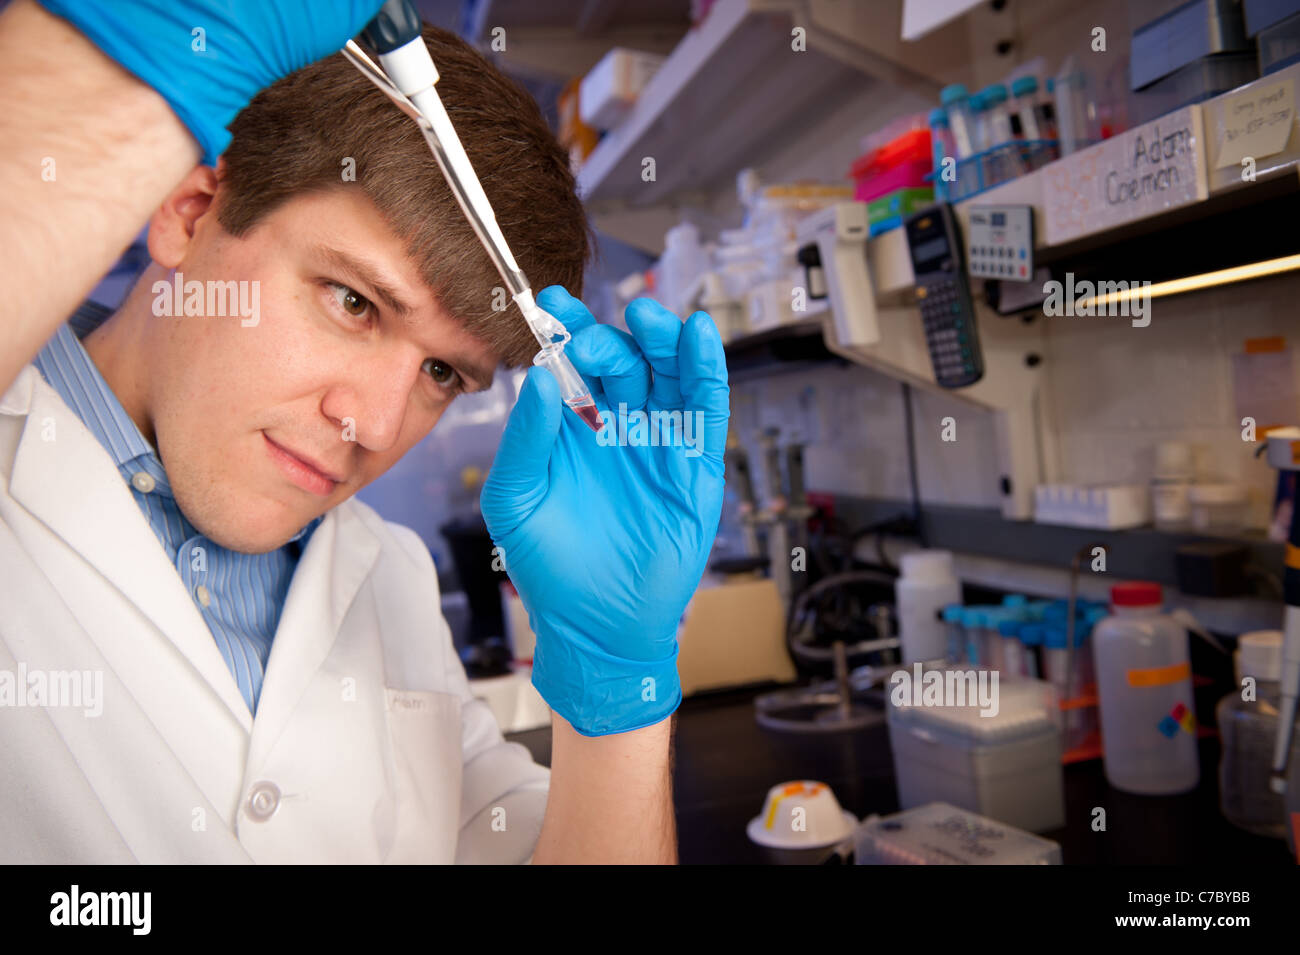 Scientist conducting experiment in a lab Stock Photo